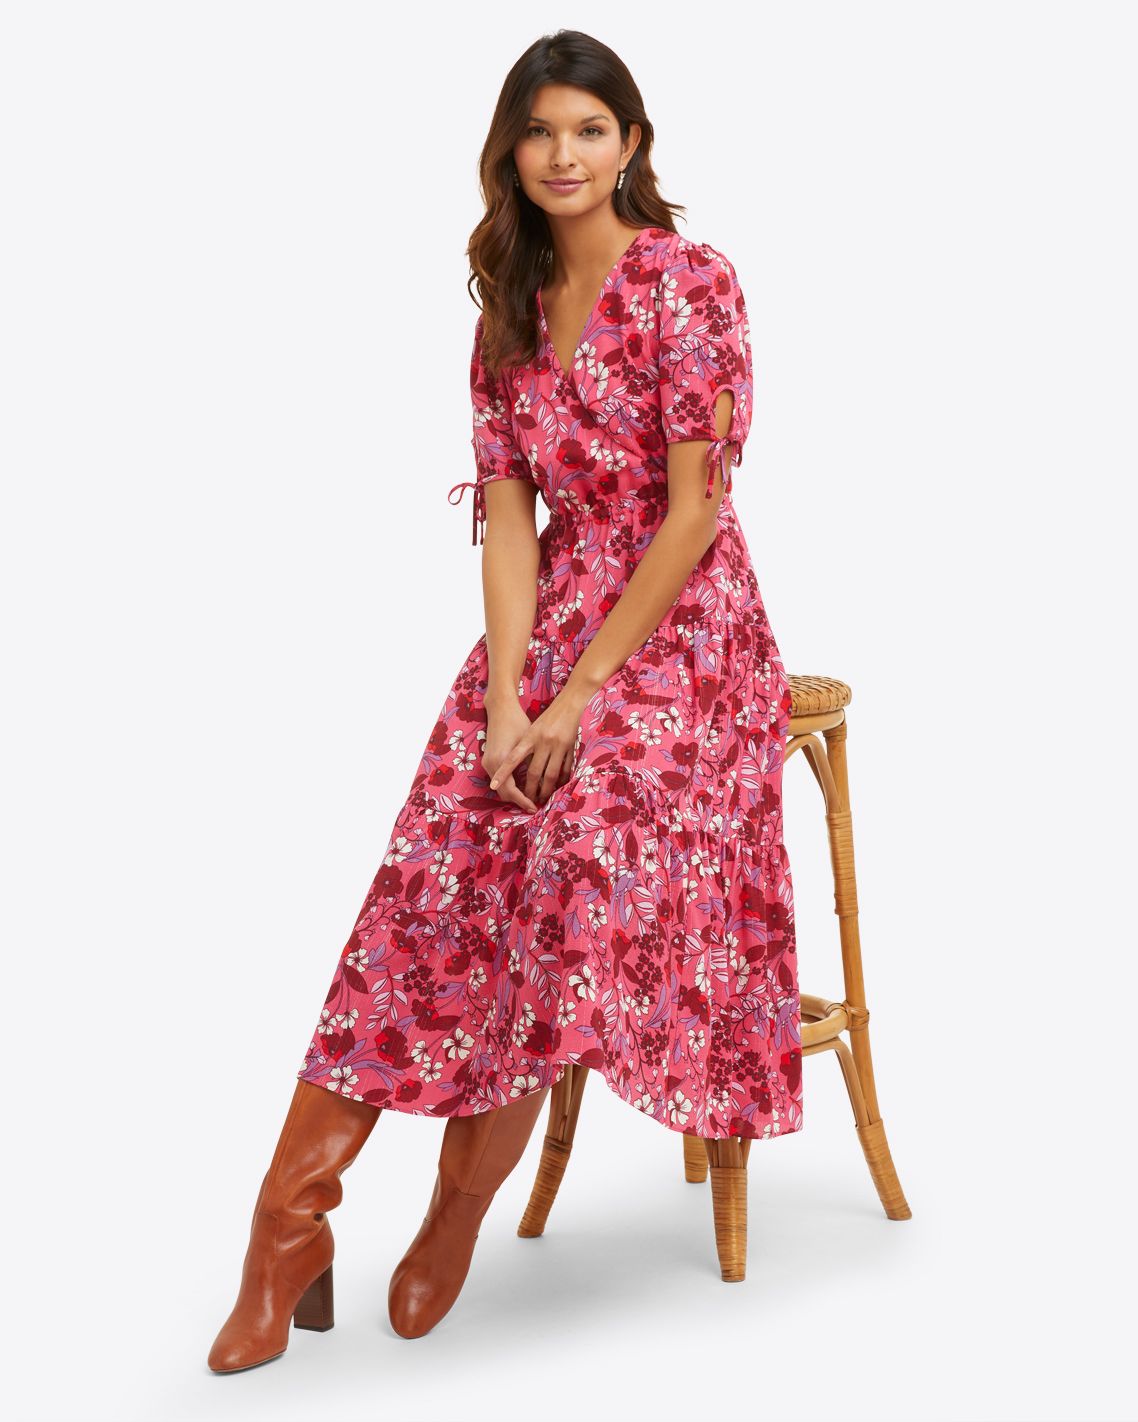 Faux Wrap Dress in Raspberry Clematis Floral